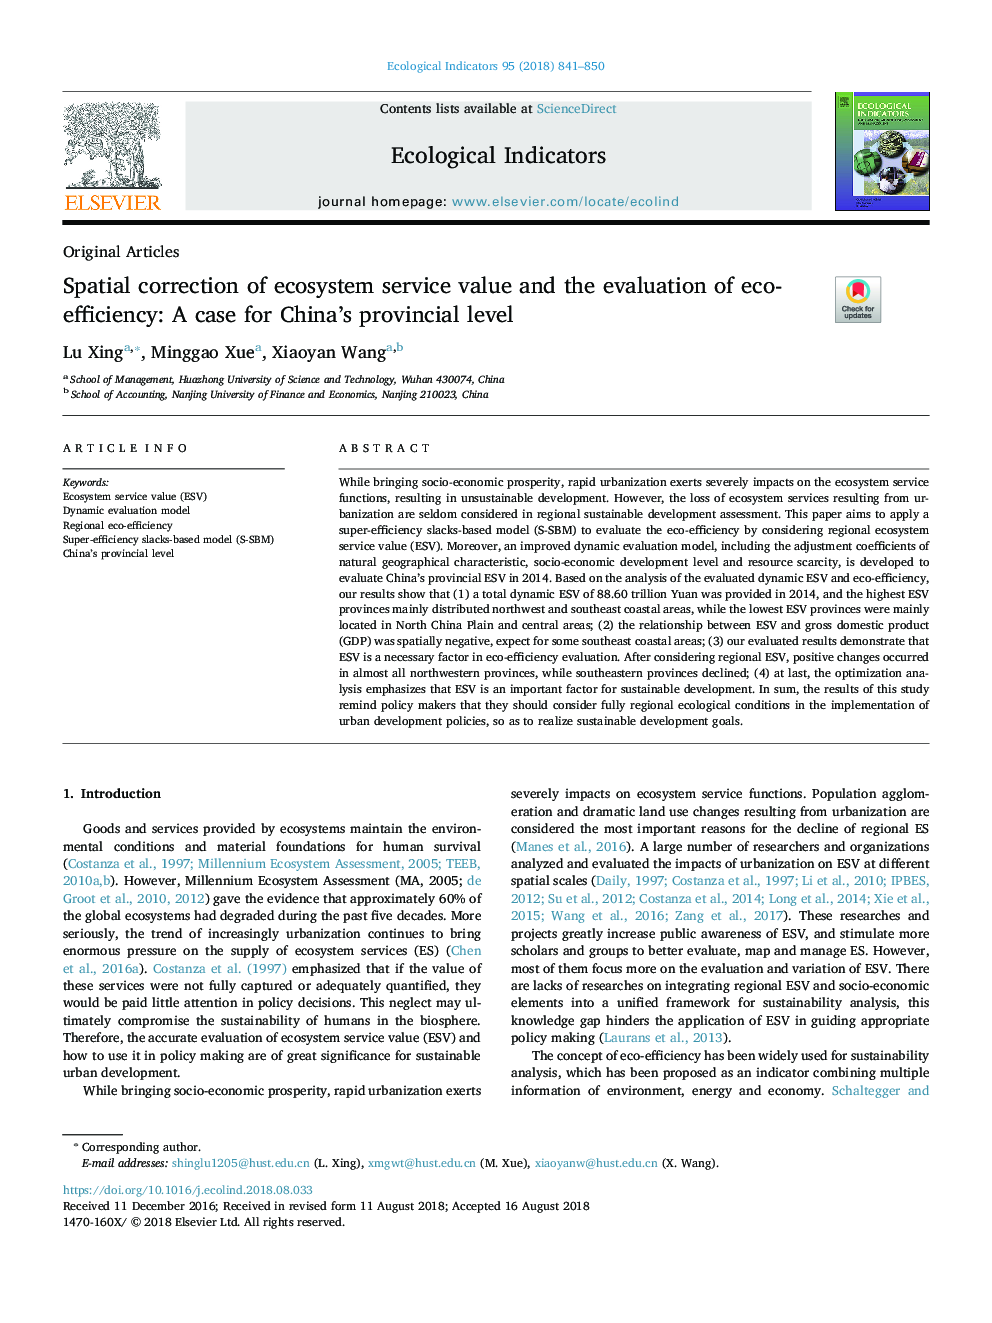 Spatial correction of ecosystem service value and the evaluation of eco-efficiency: A case for China's provincial level